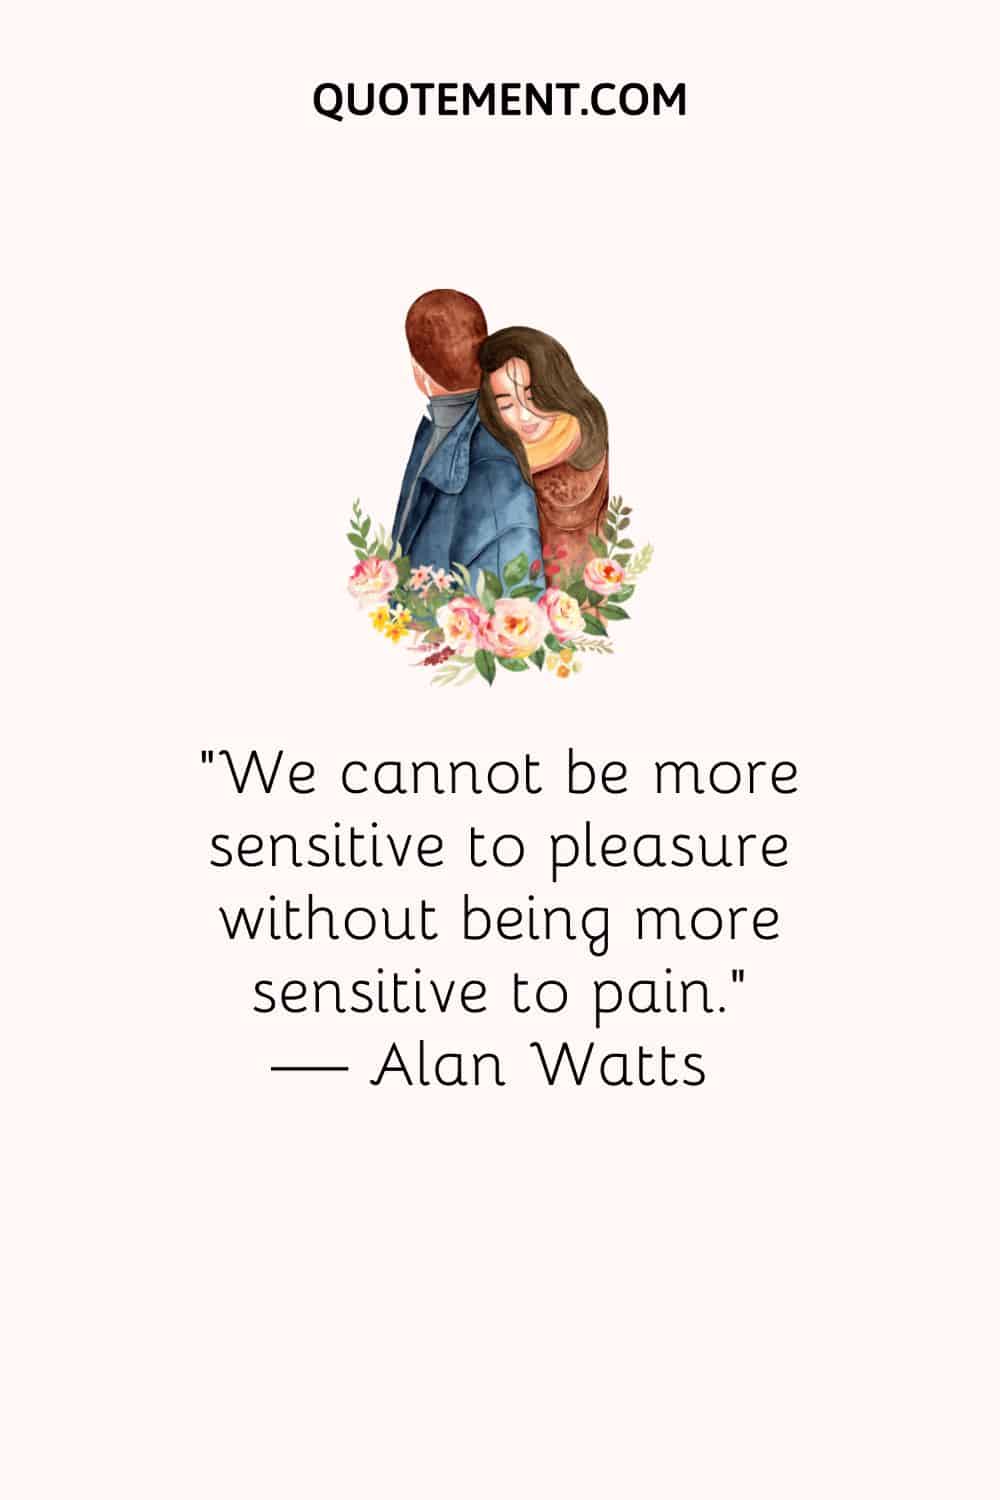 illustration of two people hugging representing empath quote